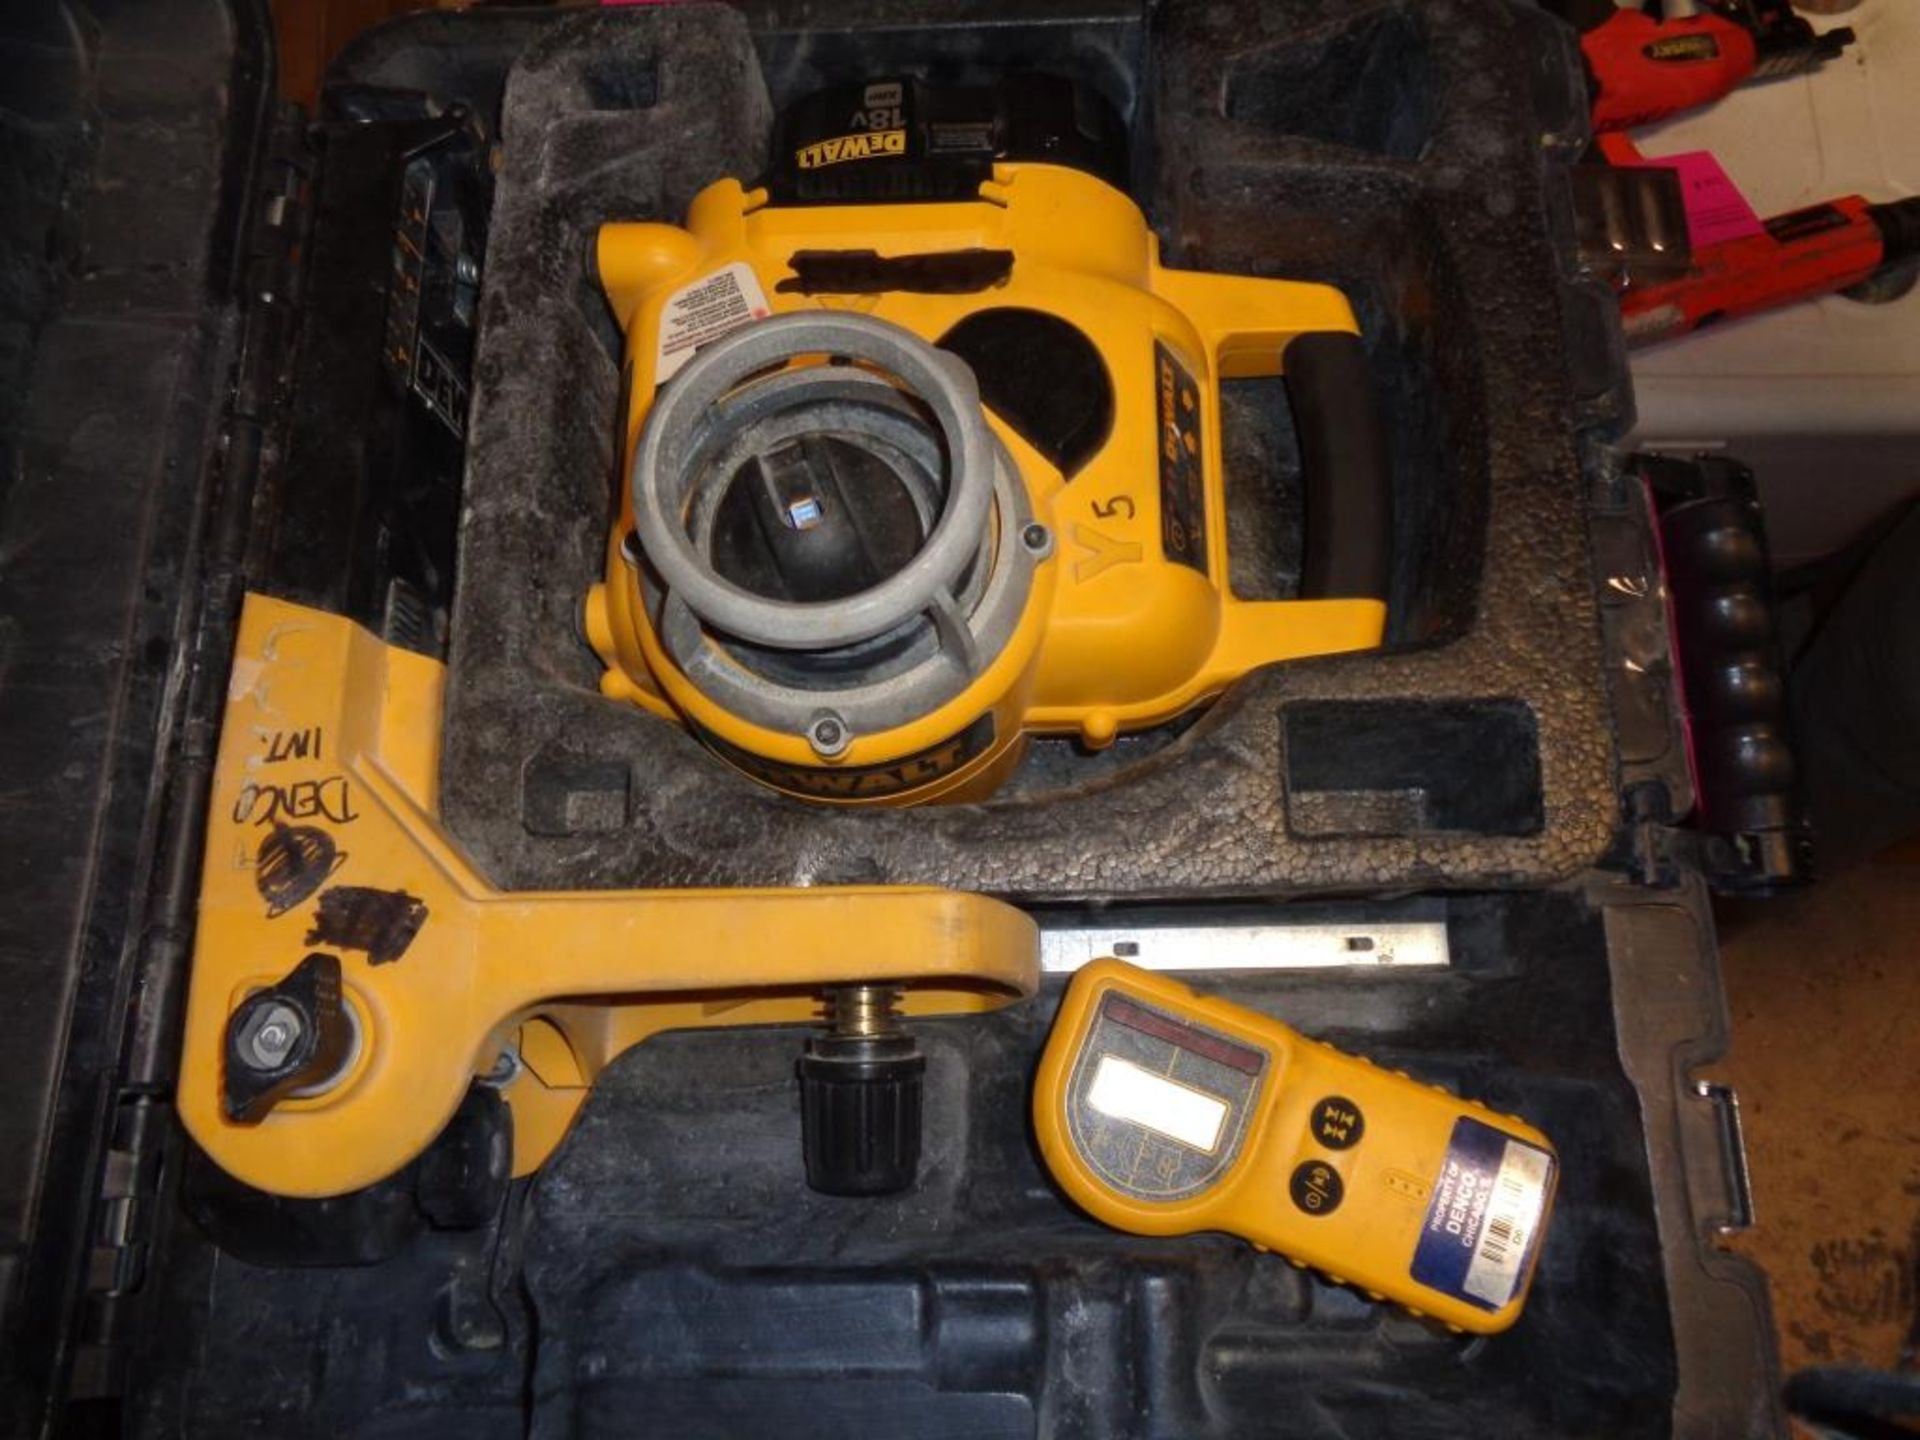 DEWALT ROTARY LASER MODEL DW077 WITH GUIDE AND LASER DETECTOR MODEL DW0772, REMOTE, WITH CASE